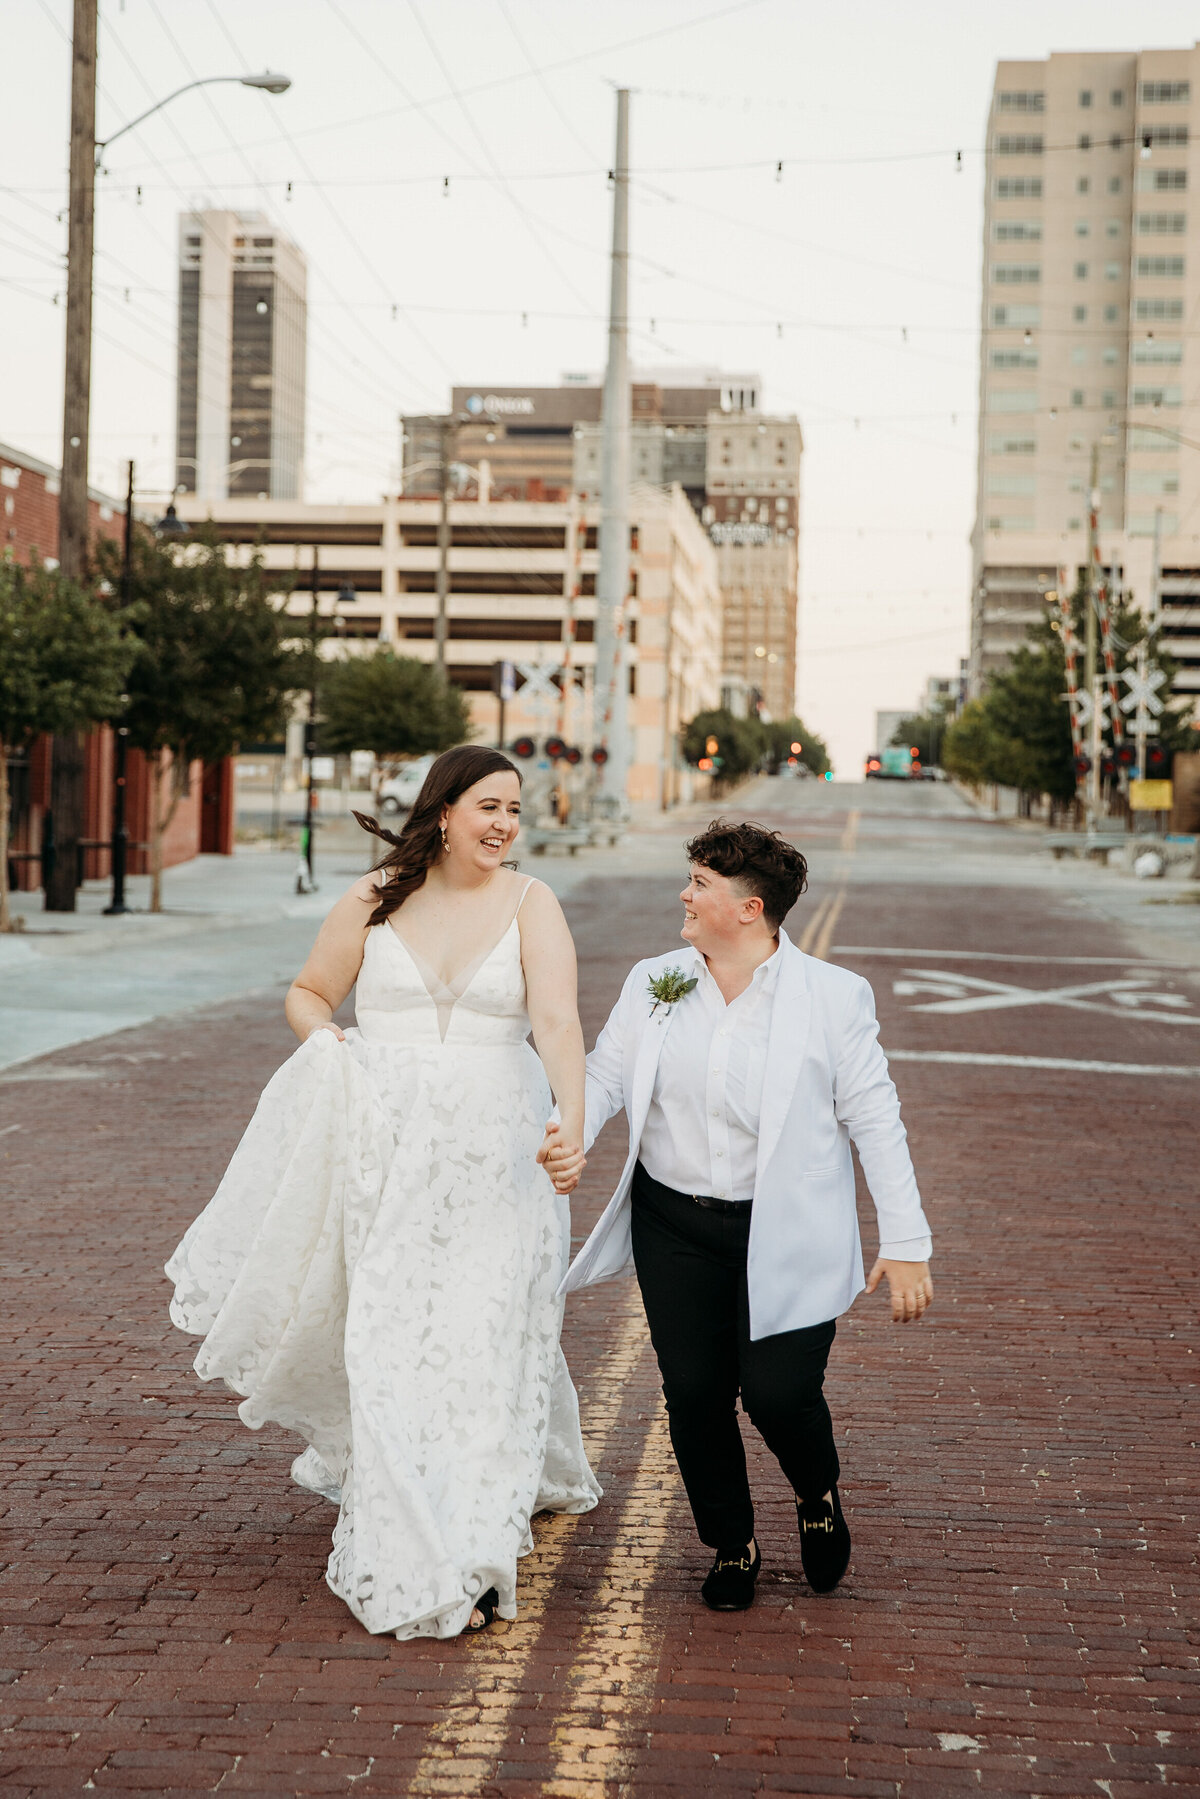 Two brides smiling and walking hand in hand down an urban street